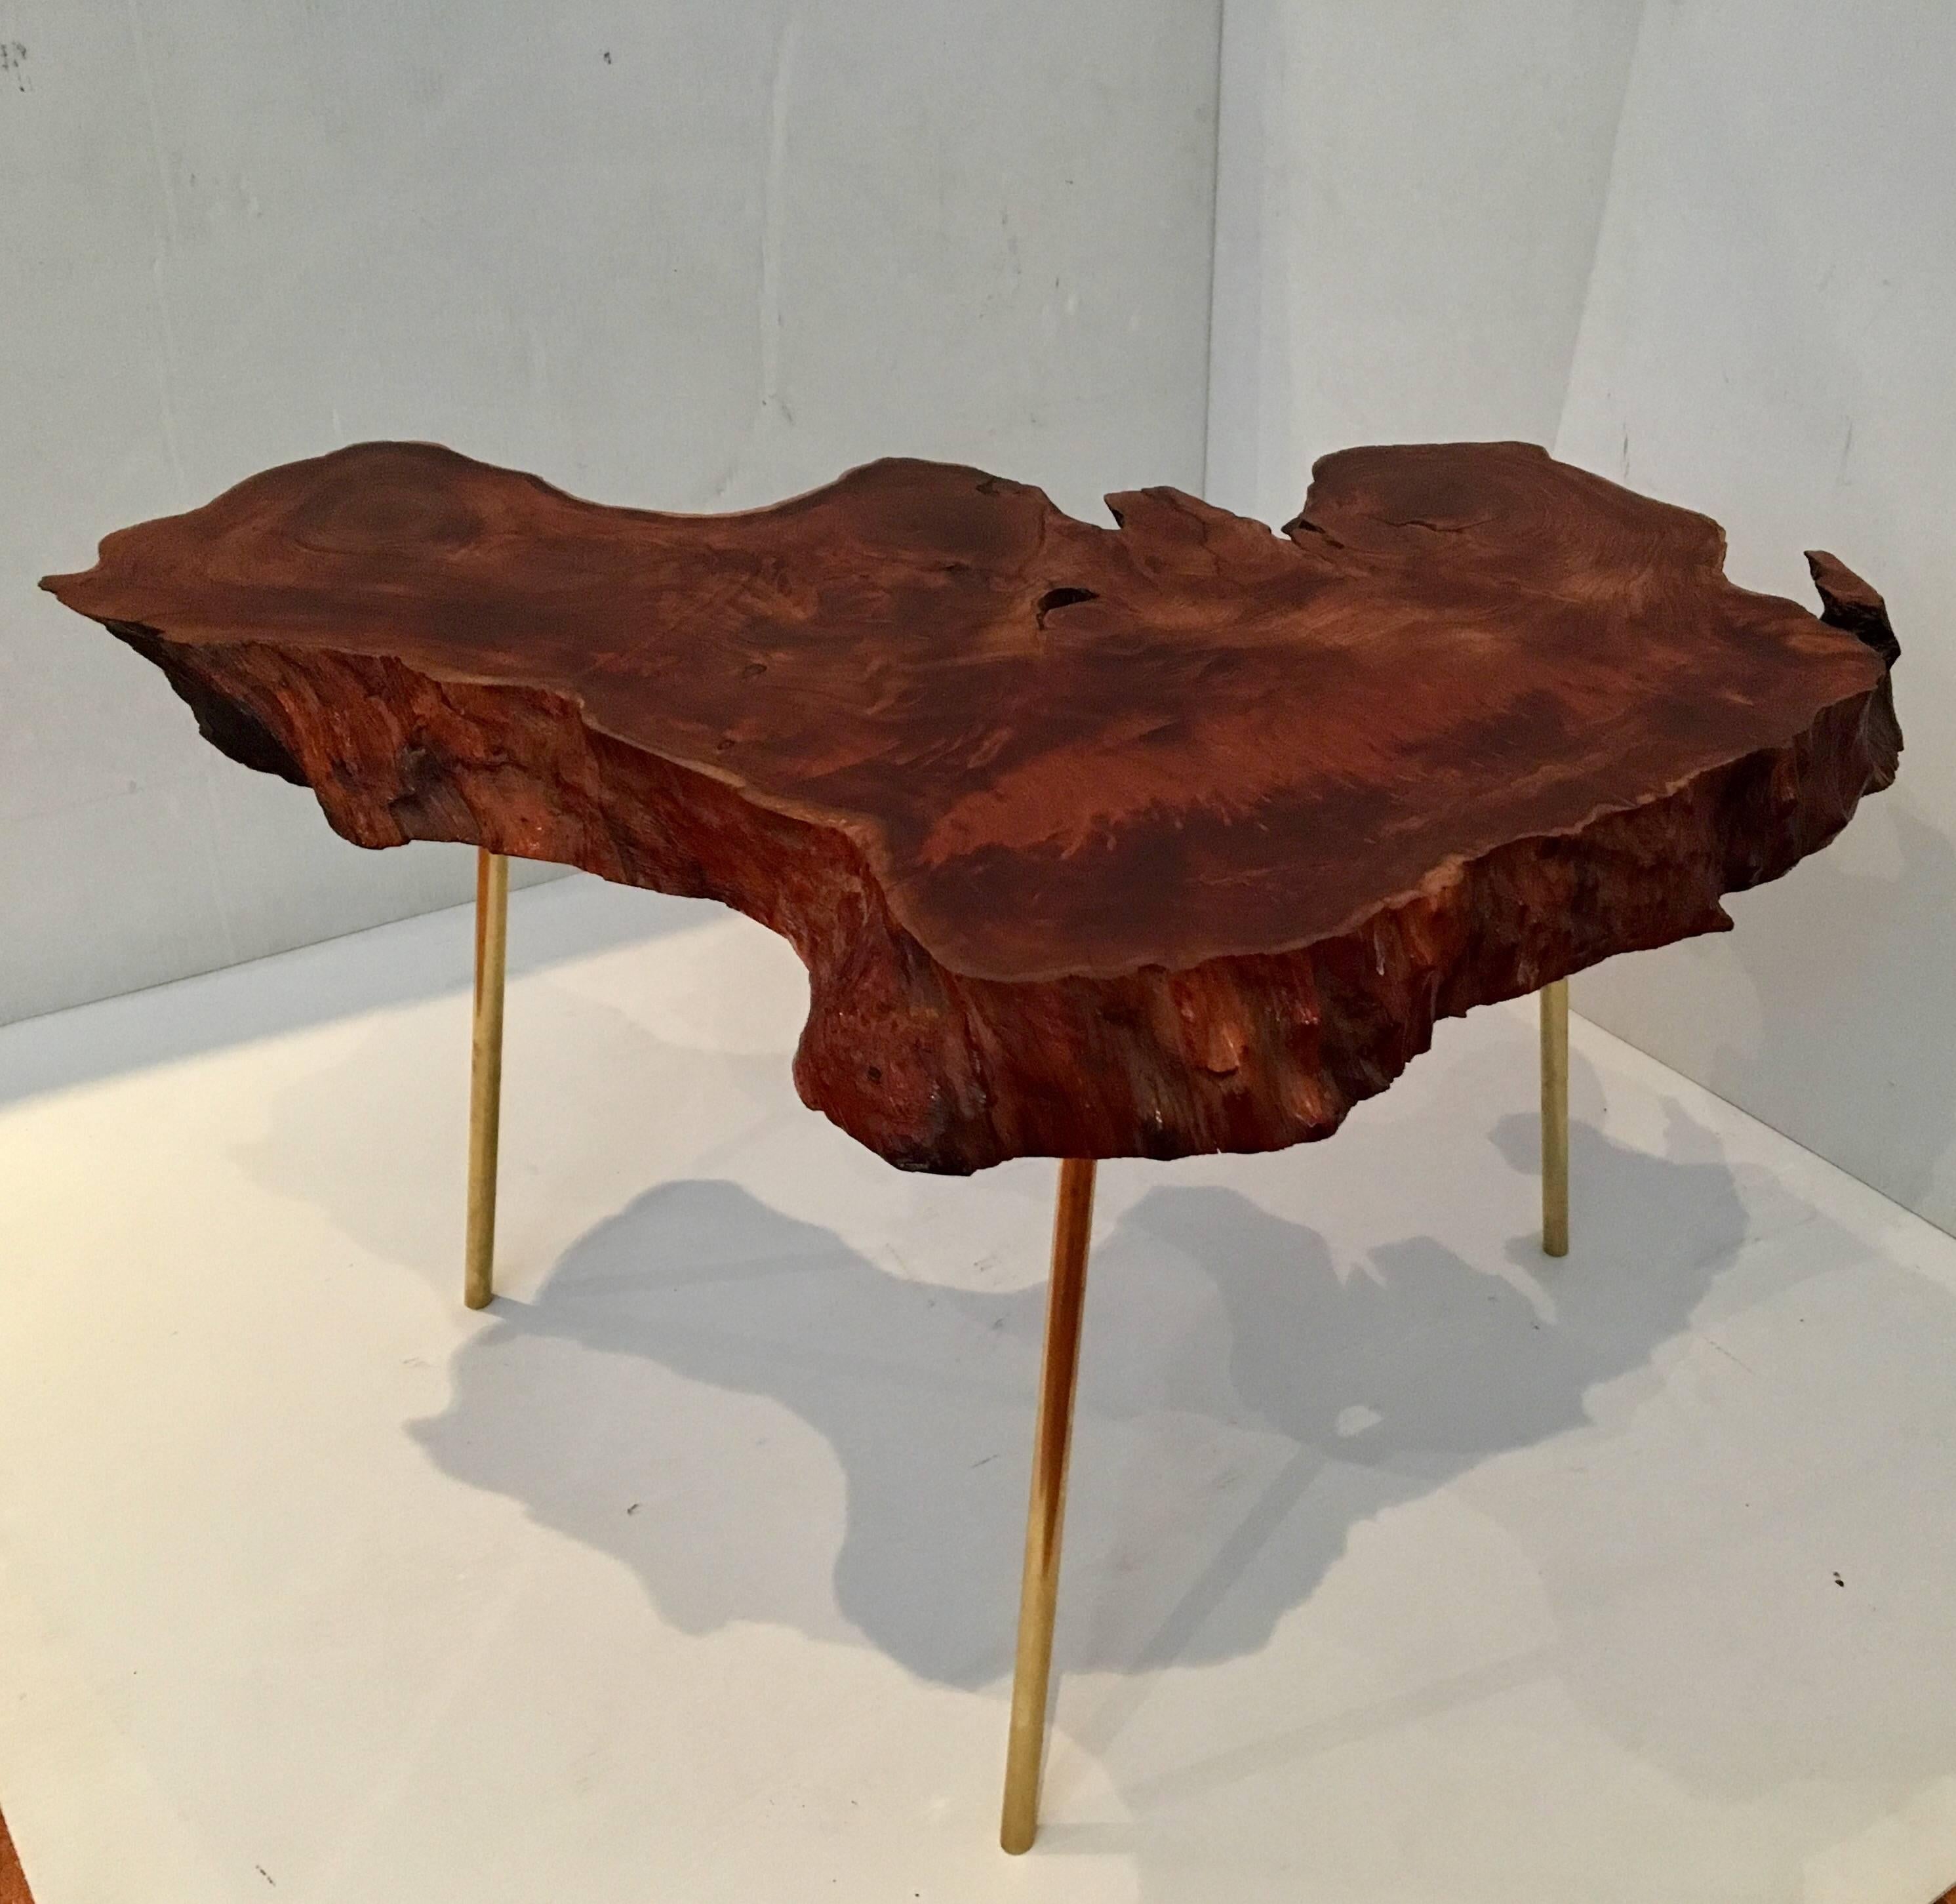 Biomorphic free-form coffee or cocktail table, in the style of Carl Auböck, 2.75" thick solid wood slab of redwood, sitting on three solid brass tubular legs, the top has been refinished and oiled, left the natural finish and the legs have been